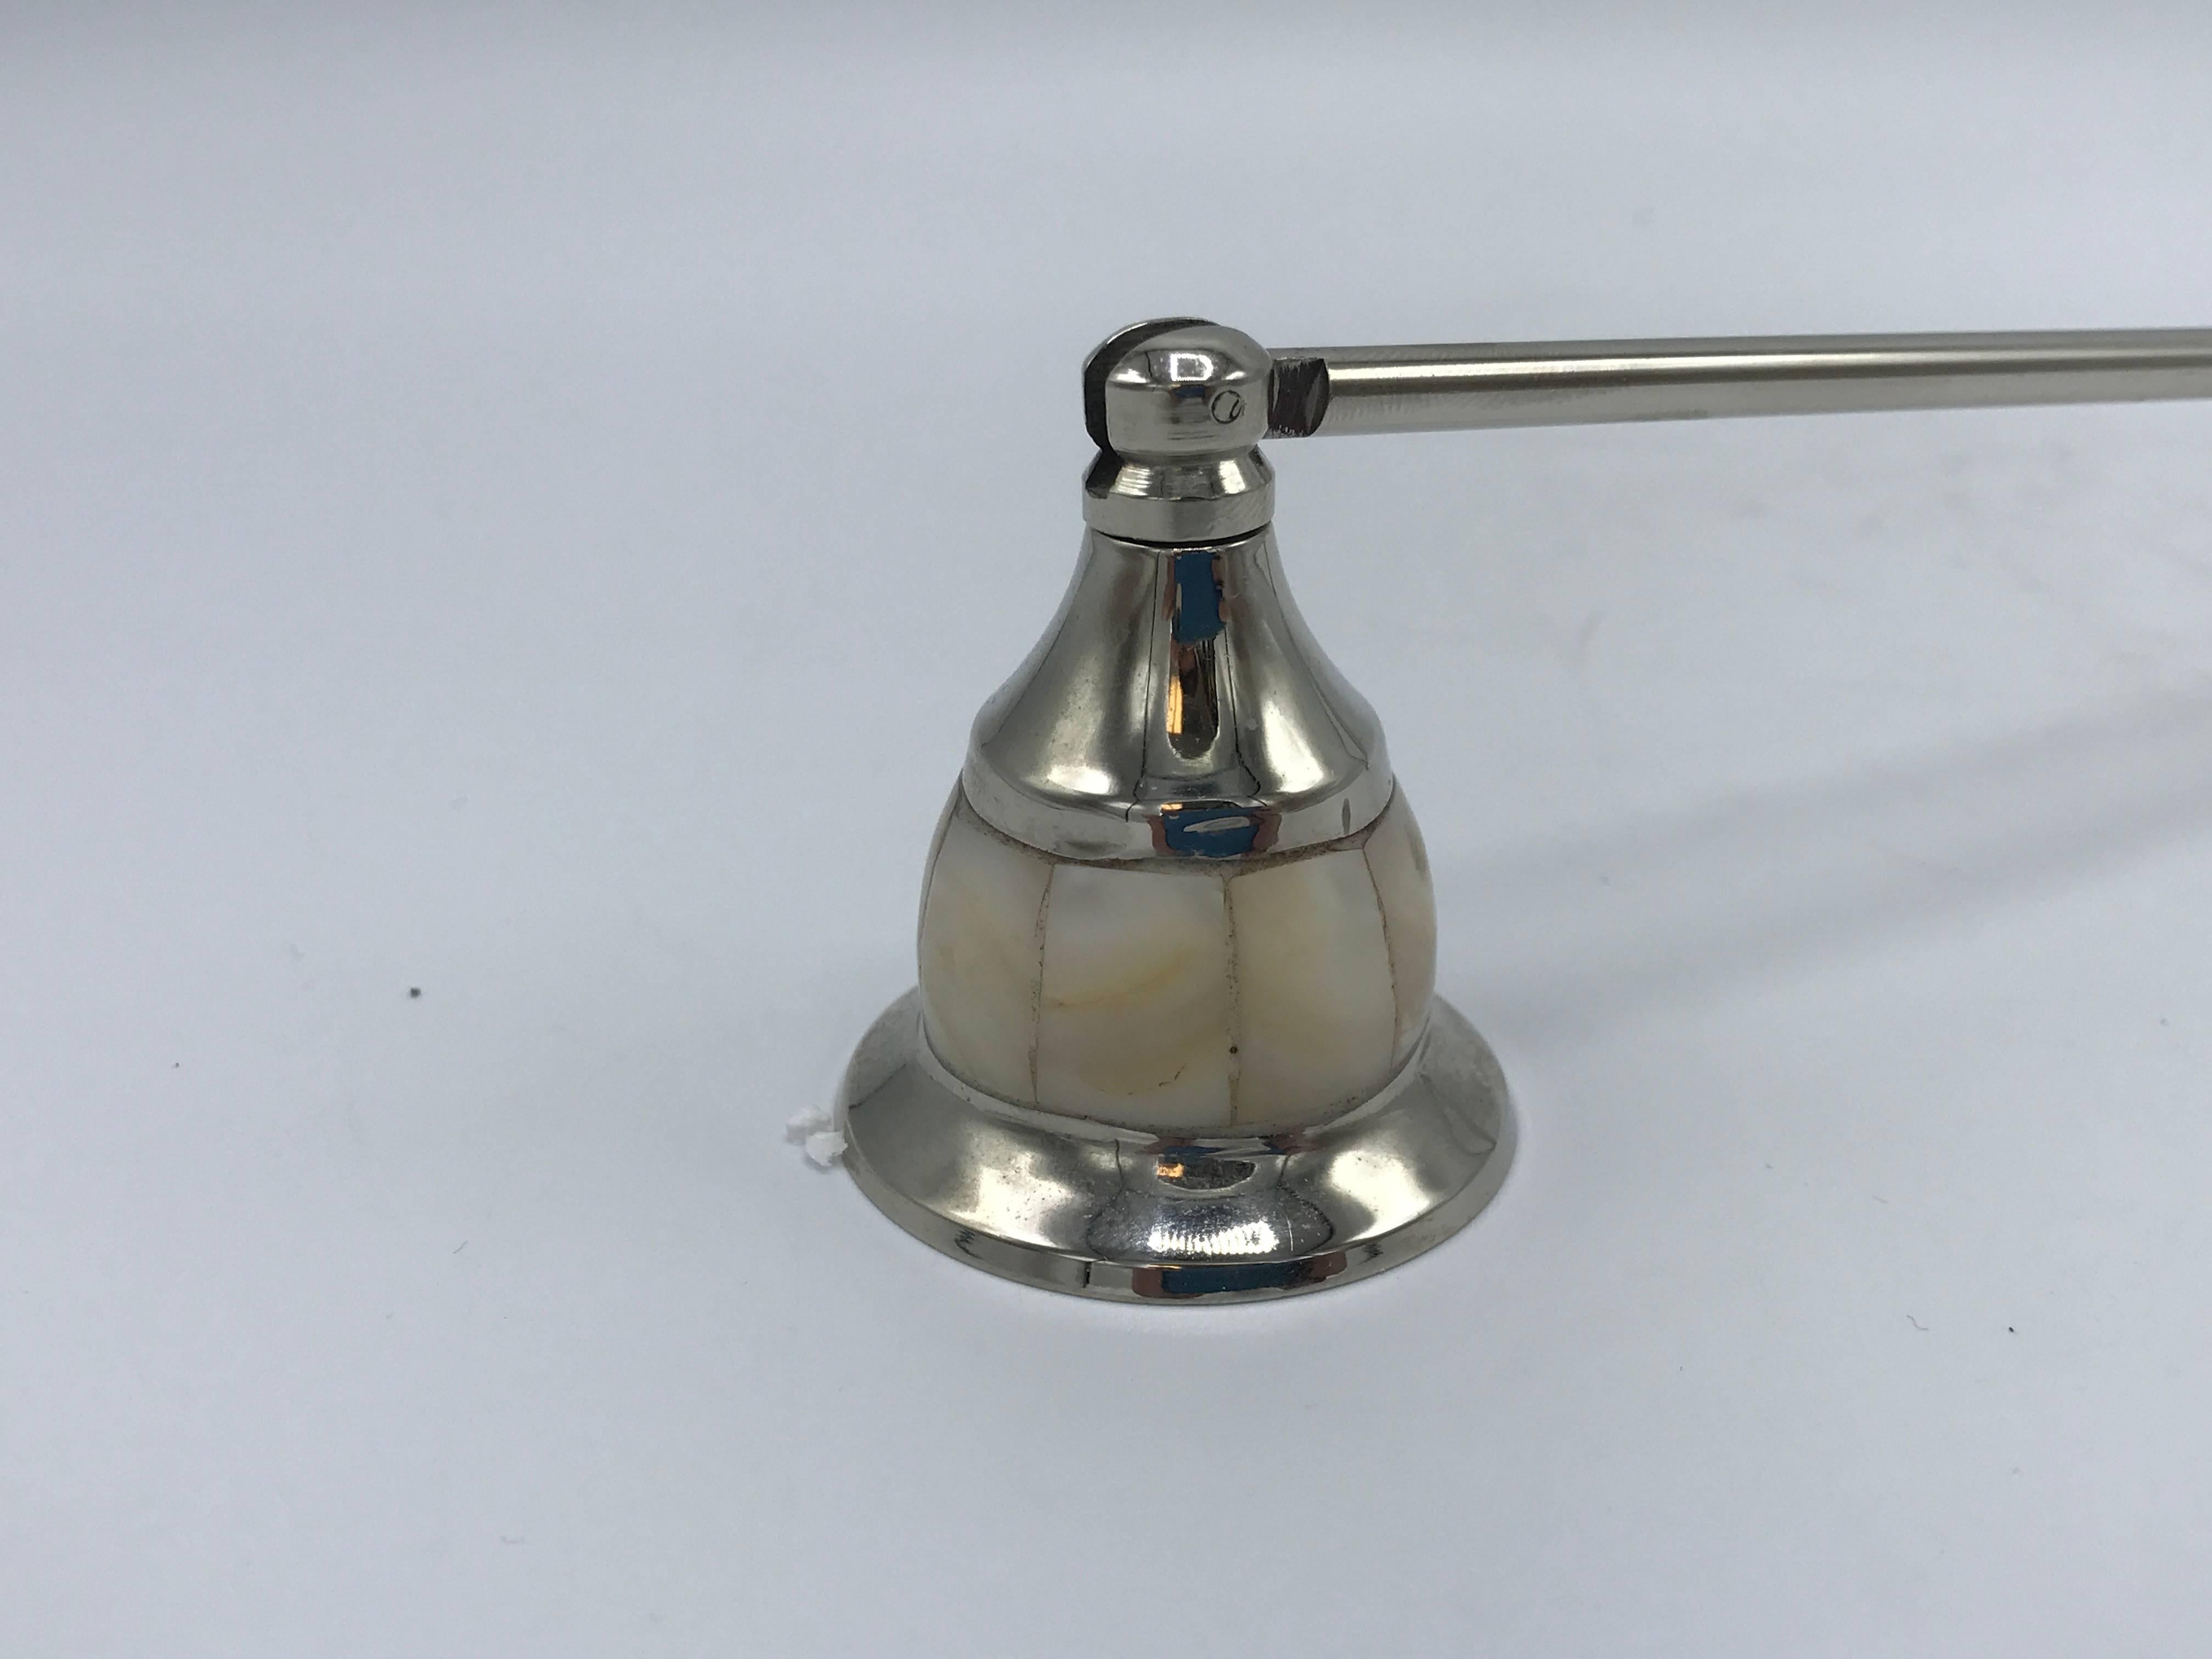 Offered is a beautiful, 1960s mother-of-pearl inlay candle snuffer. Looks like it has never been used.